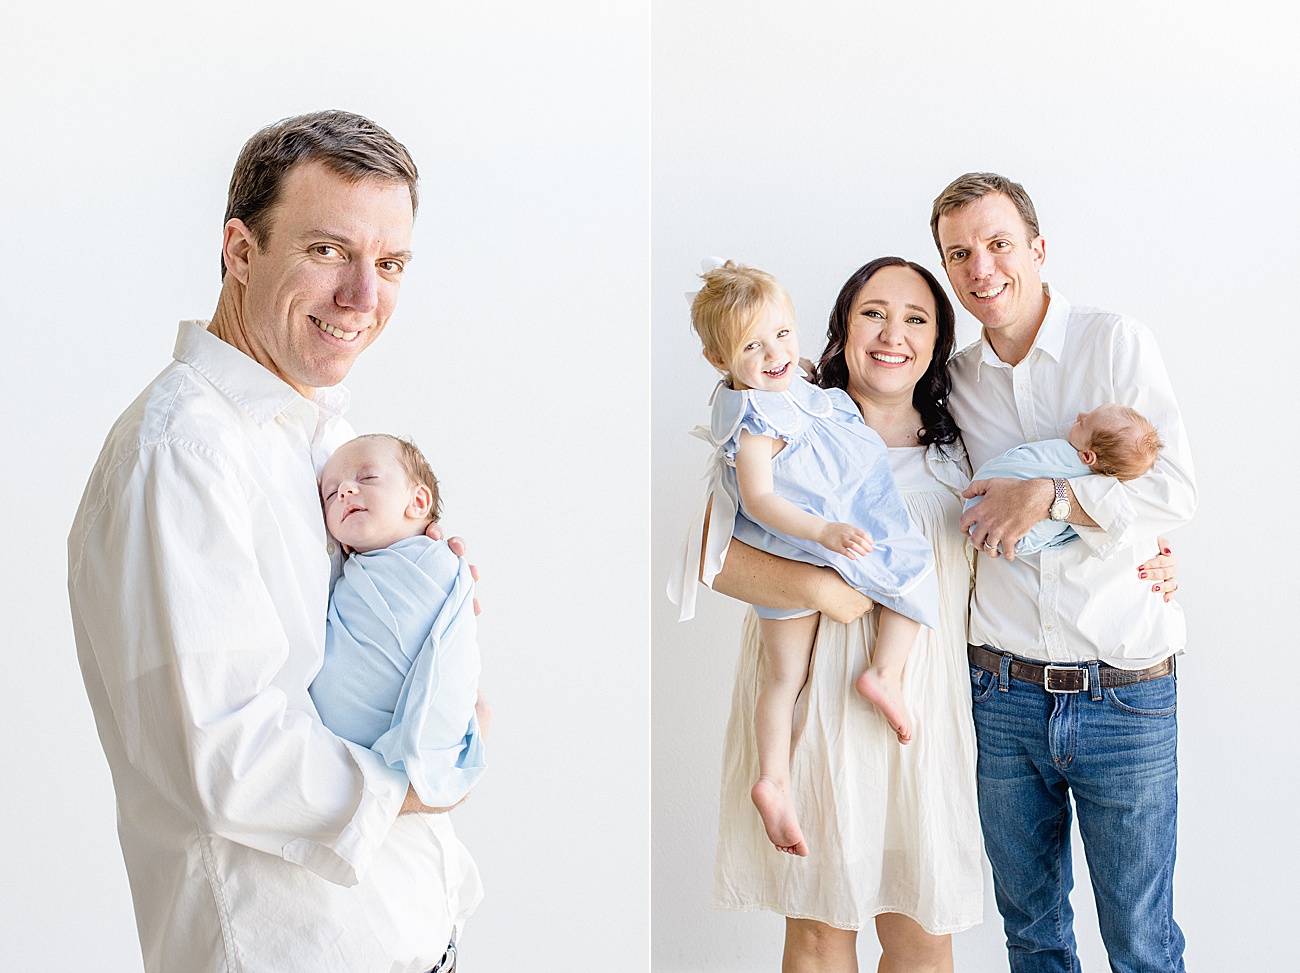 Photos of family during baby brother's newborn photoshoot with Sana Ahmed Photography.